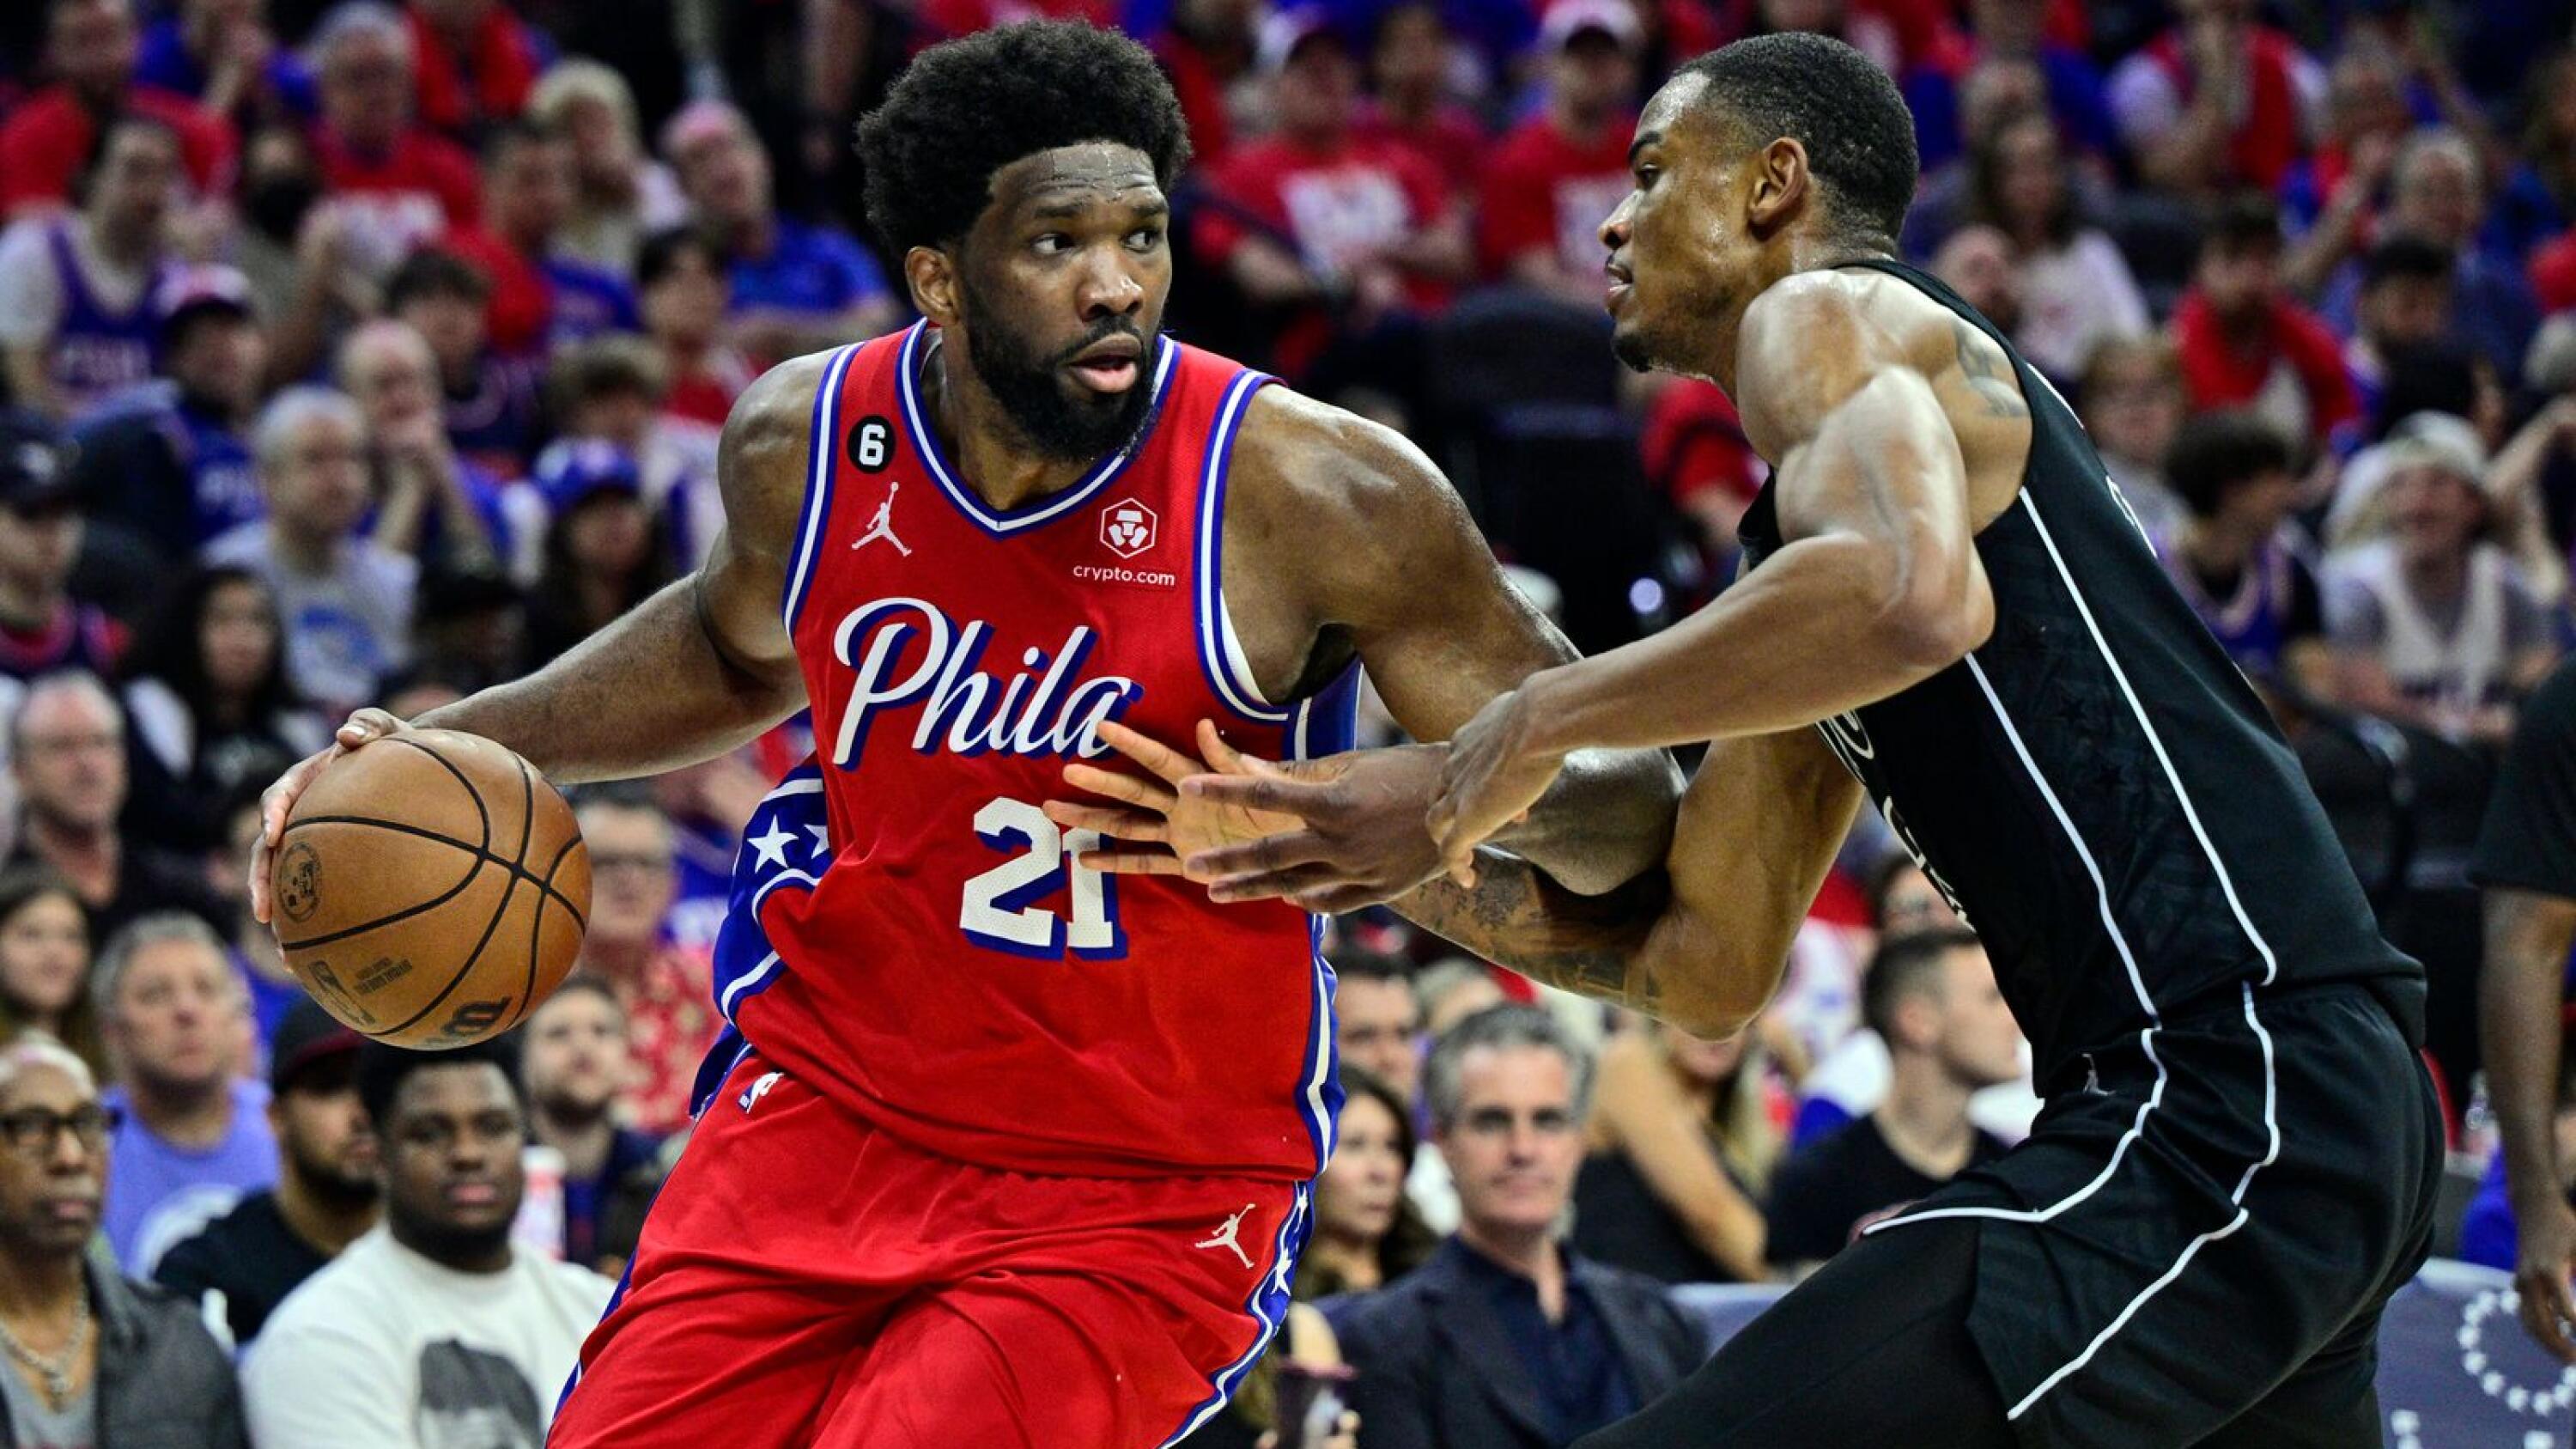 James Harden scores 26, leads Sixers to win in home debut